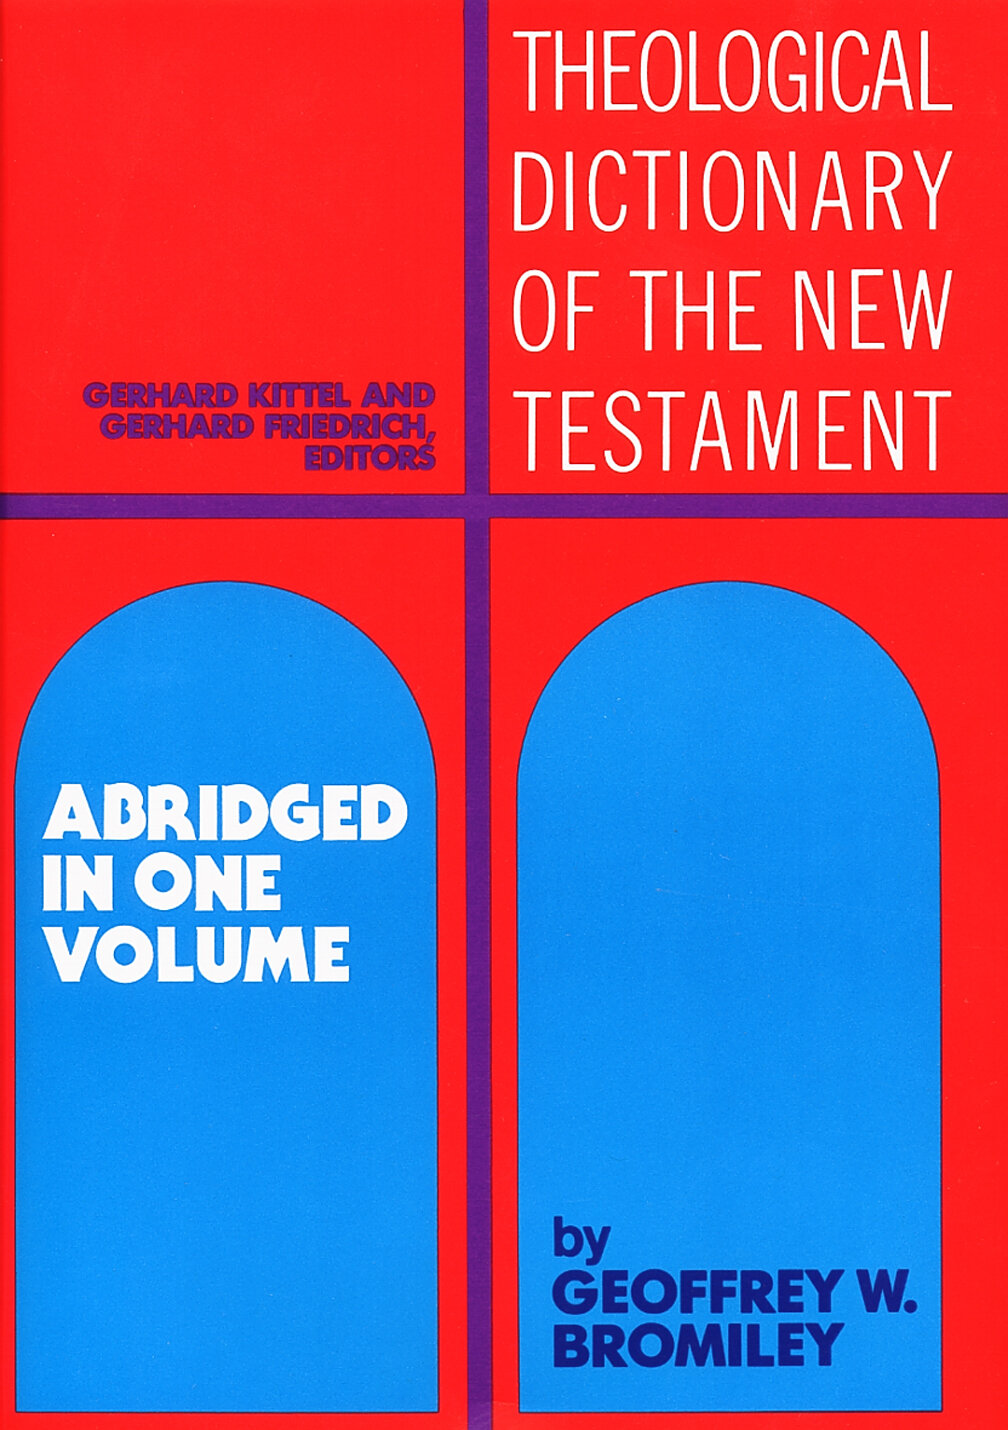 The Theological Dictionary of the New Testament, Abridged in One Volume (TDNTA)